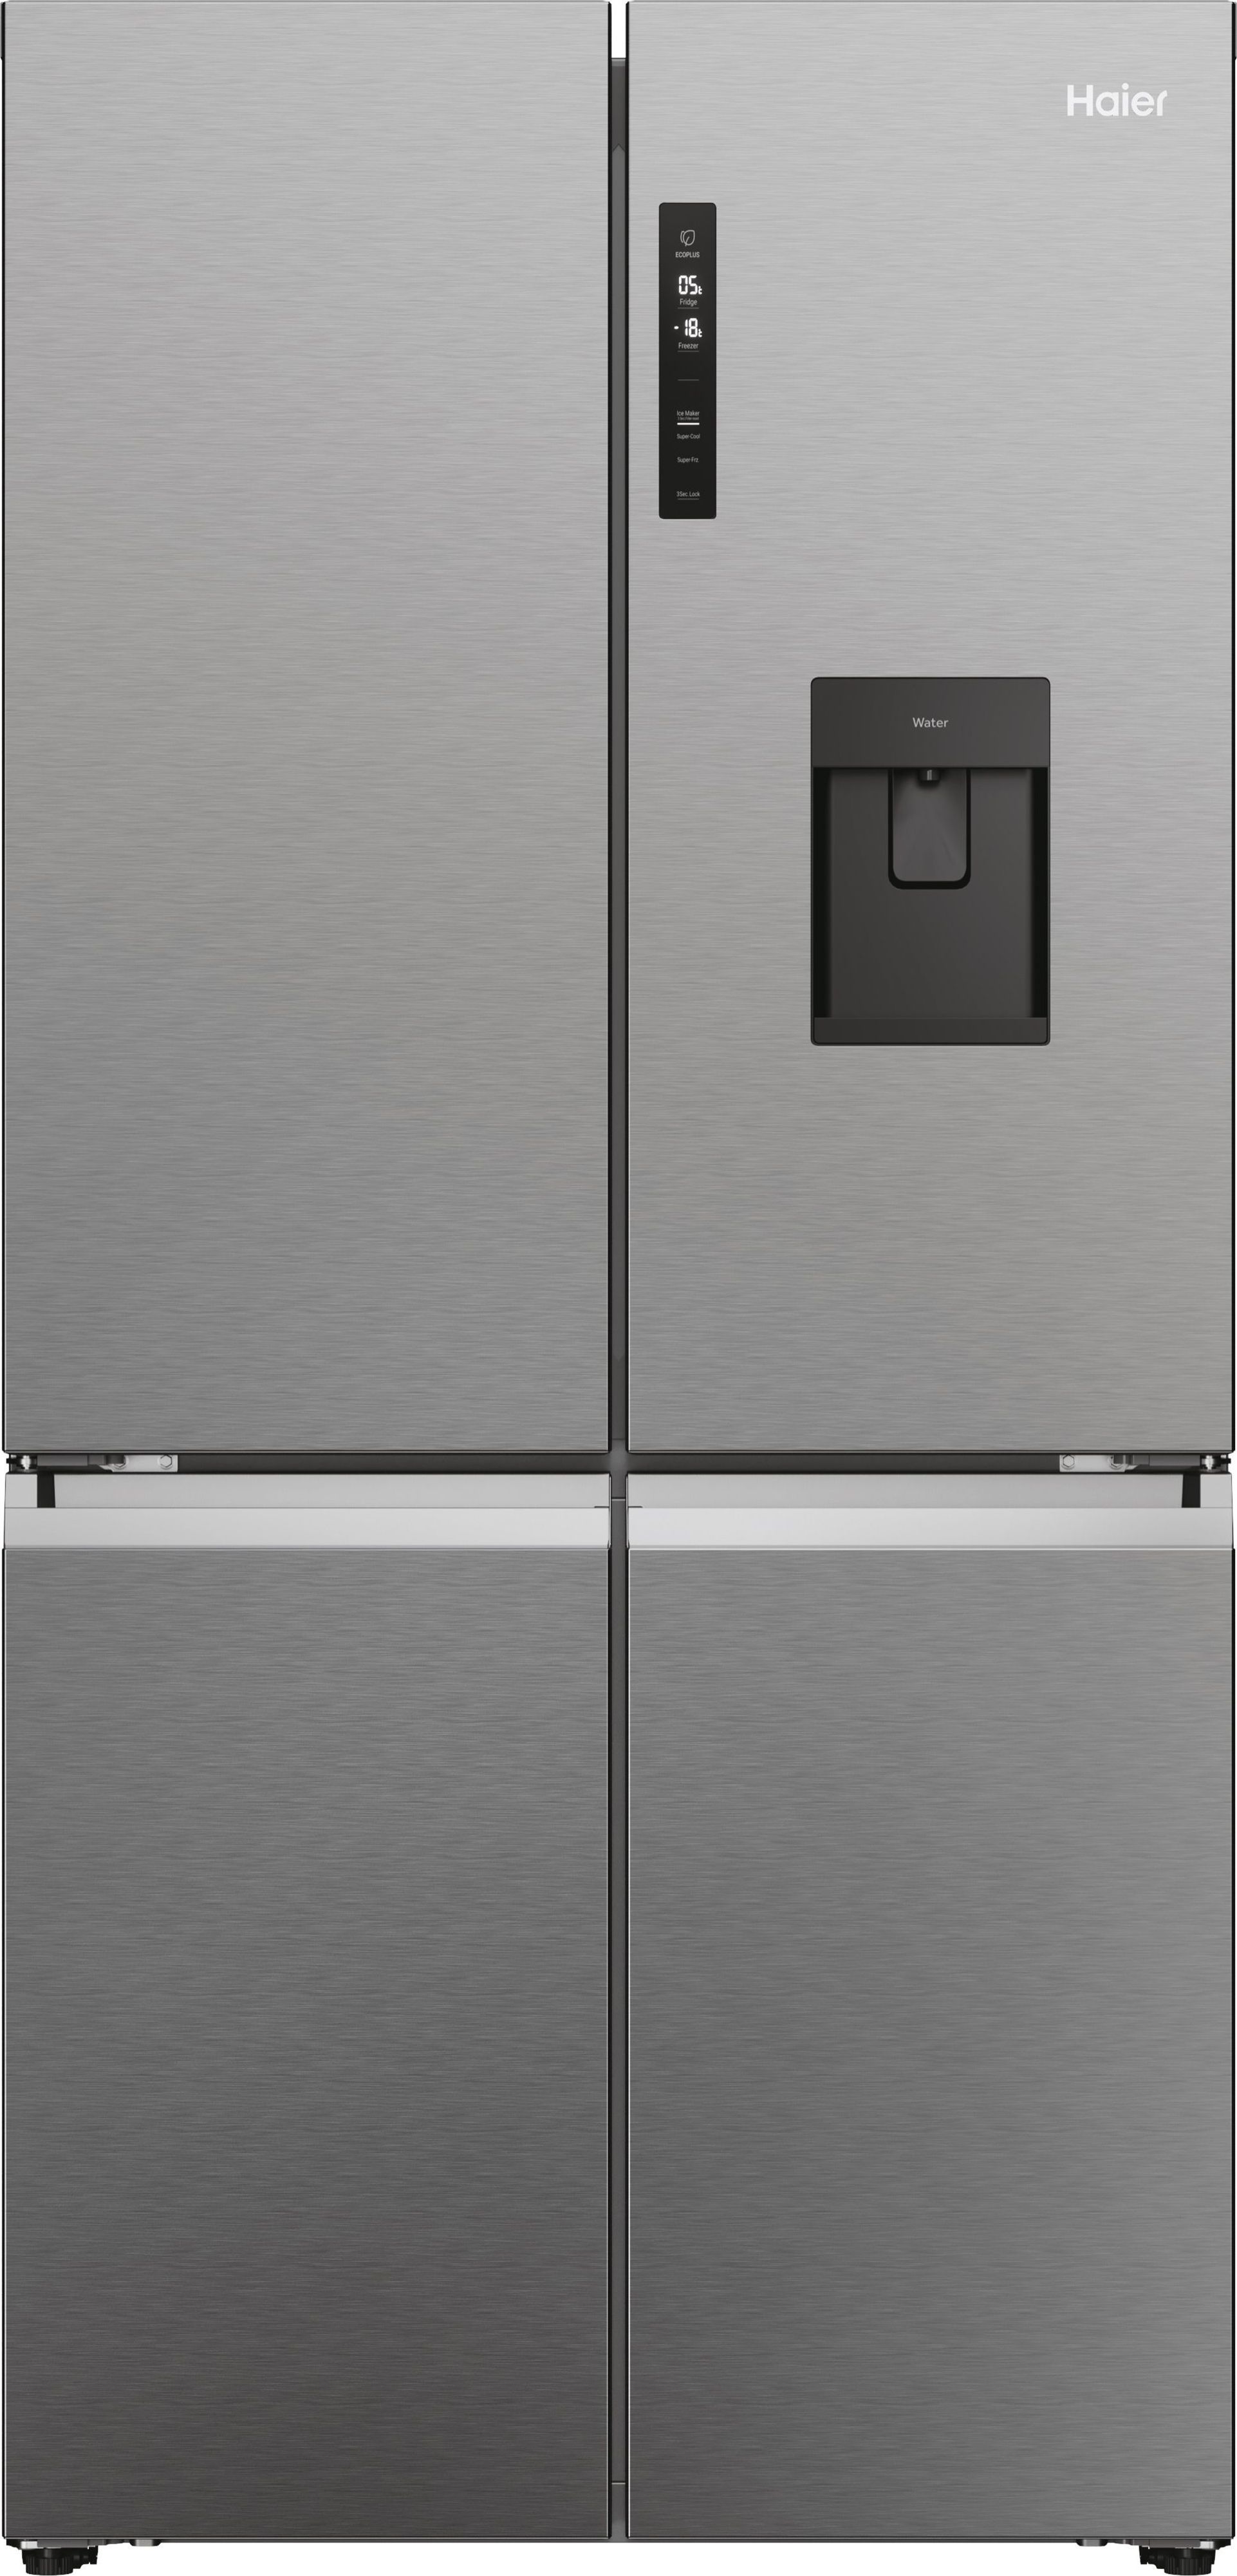 Haier Cube 90 Series 5 HCR5919EHMP Plumbed Total No Frost American Fridge Freezer - Platinum Silver - E Rated, Silver